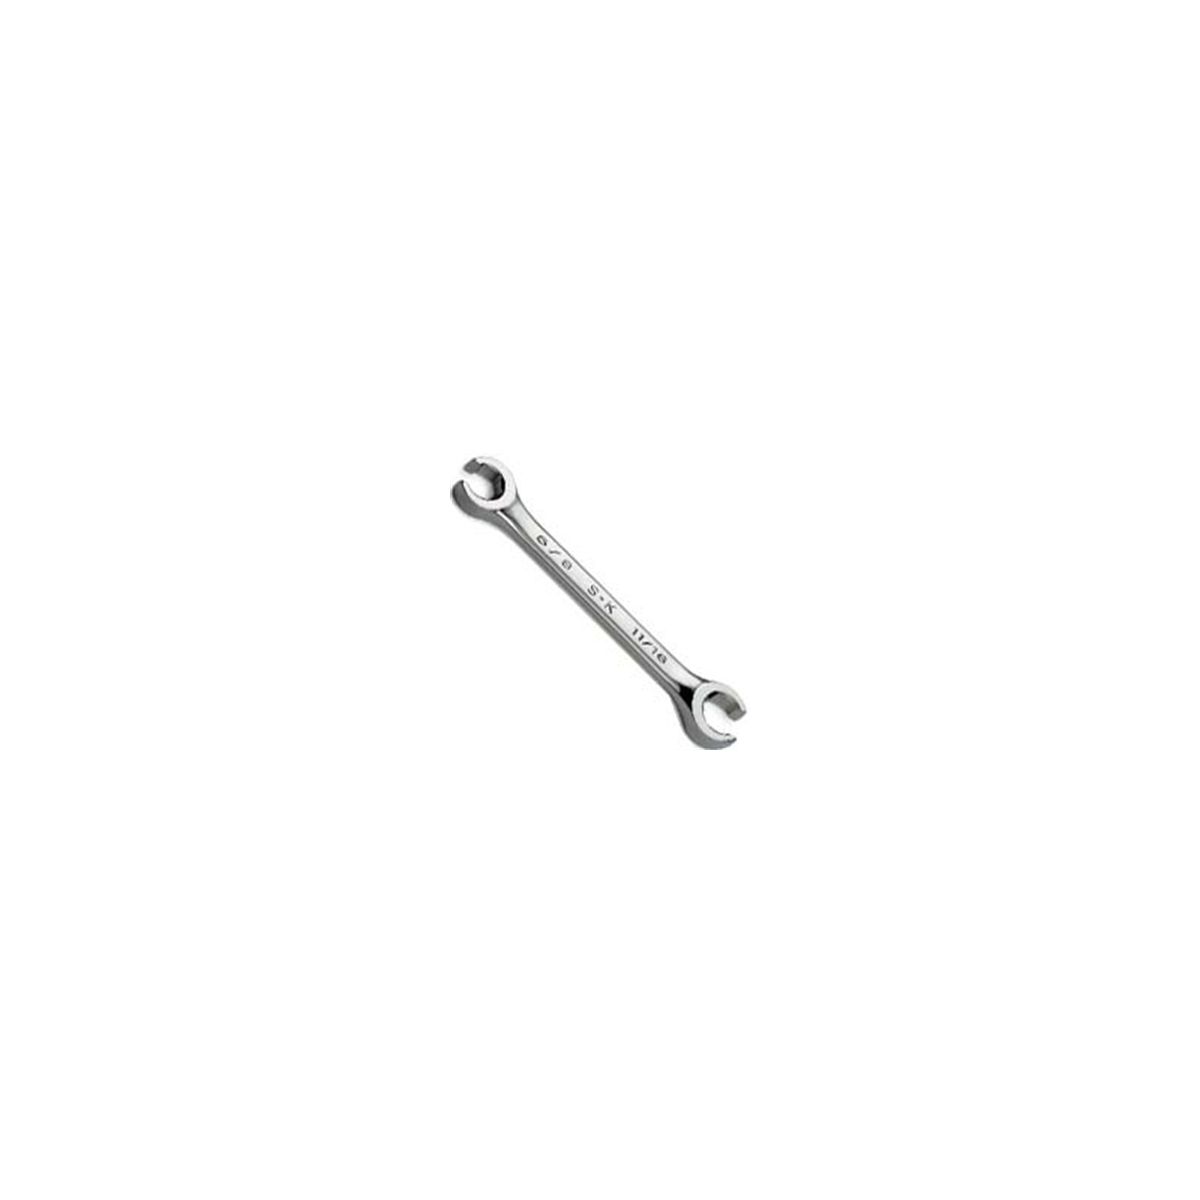 SuperKrome(R) Standard Flare Nut Wrench - 1/4 In x 5/16 In